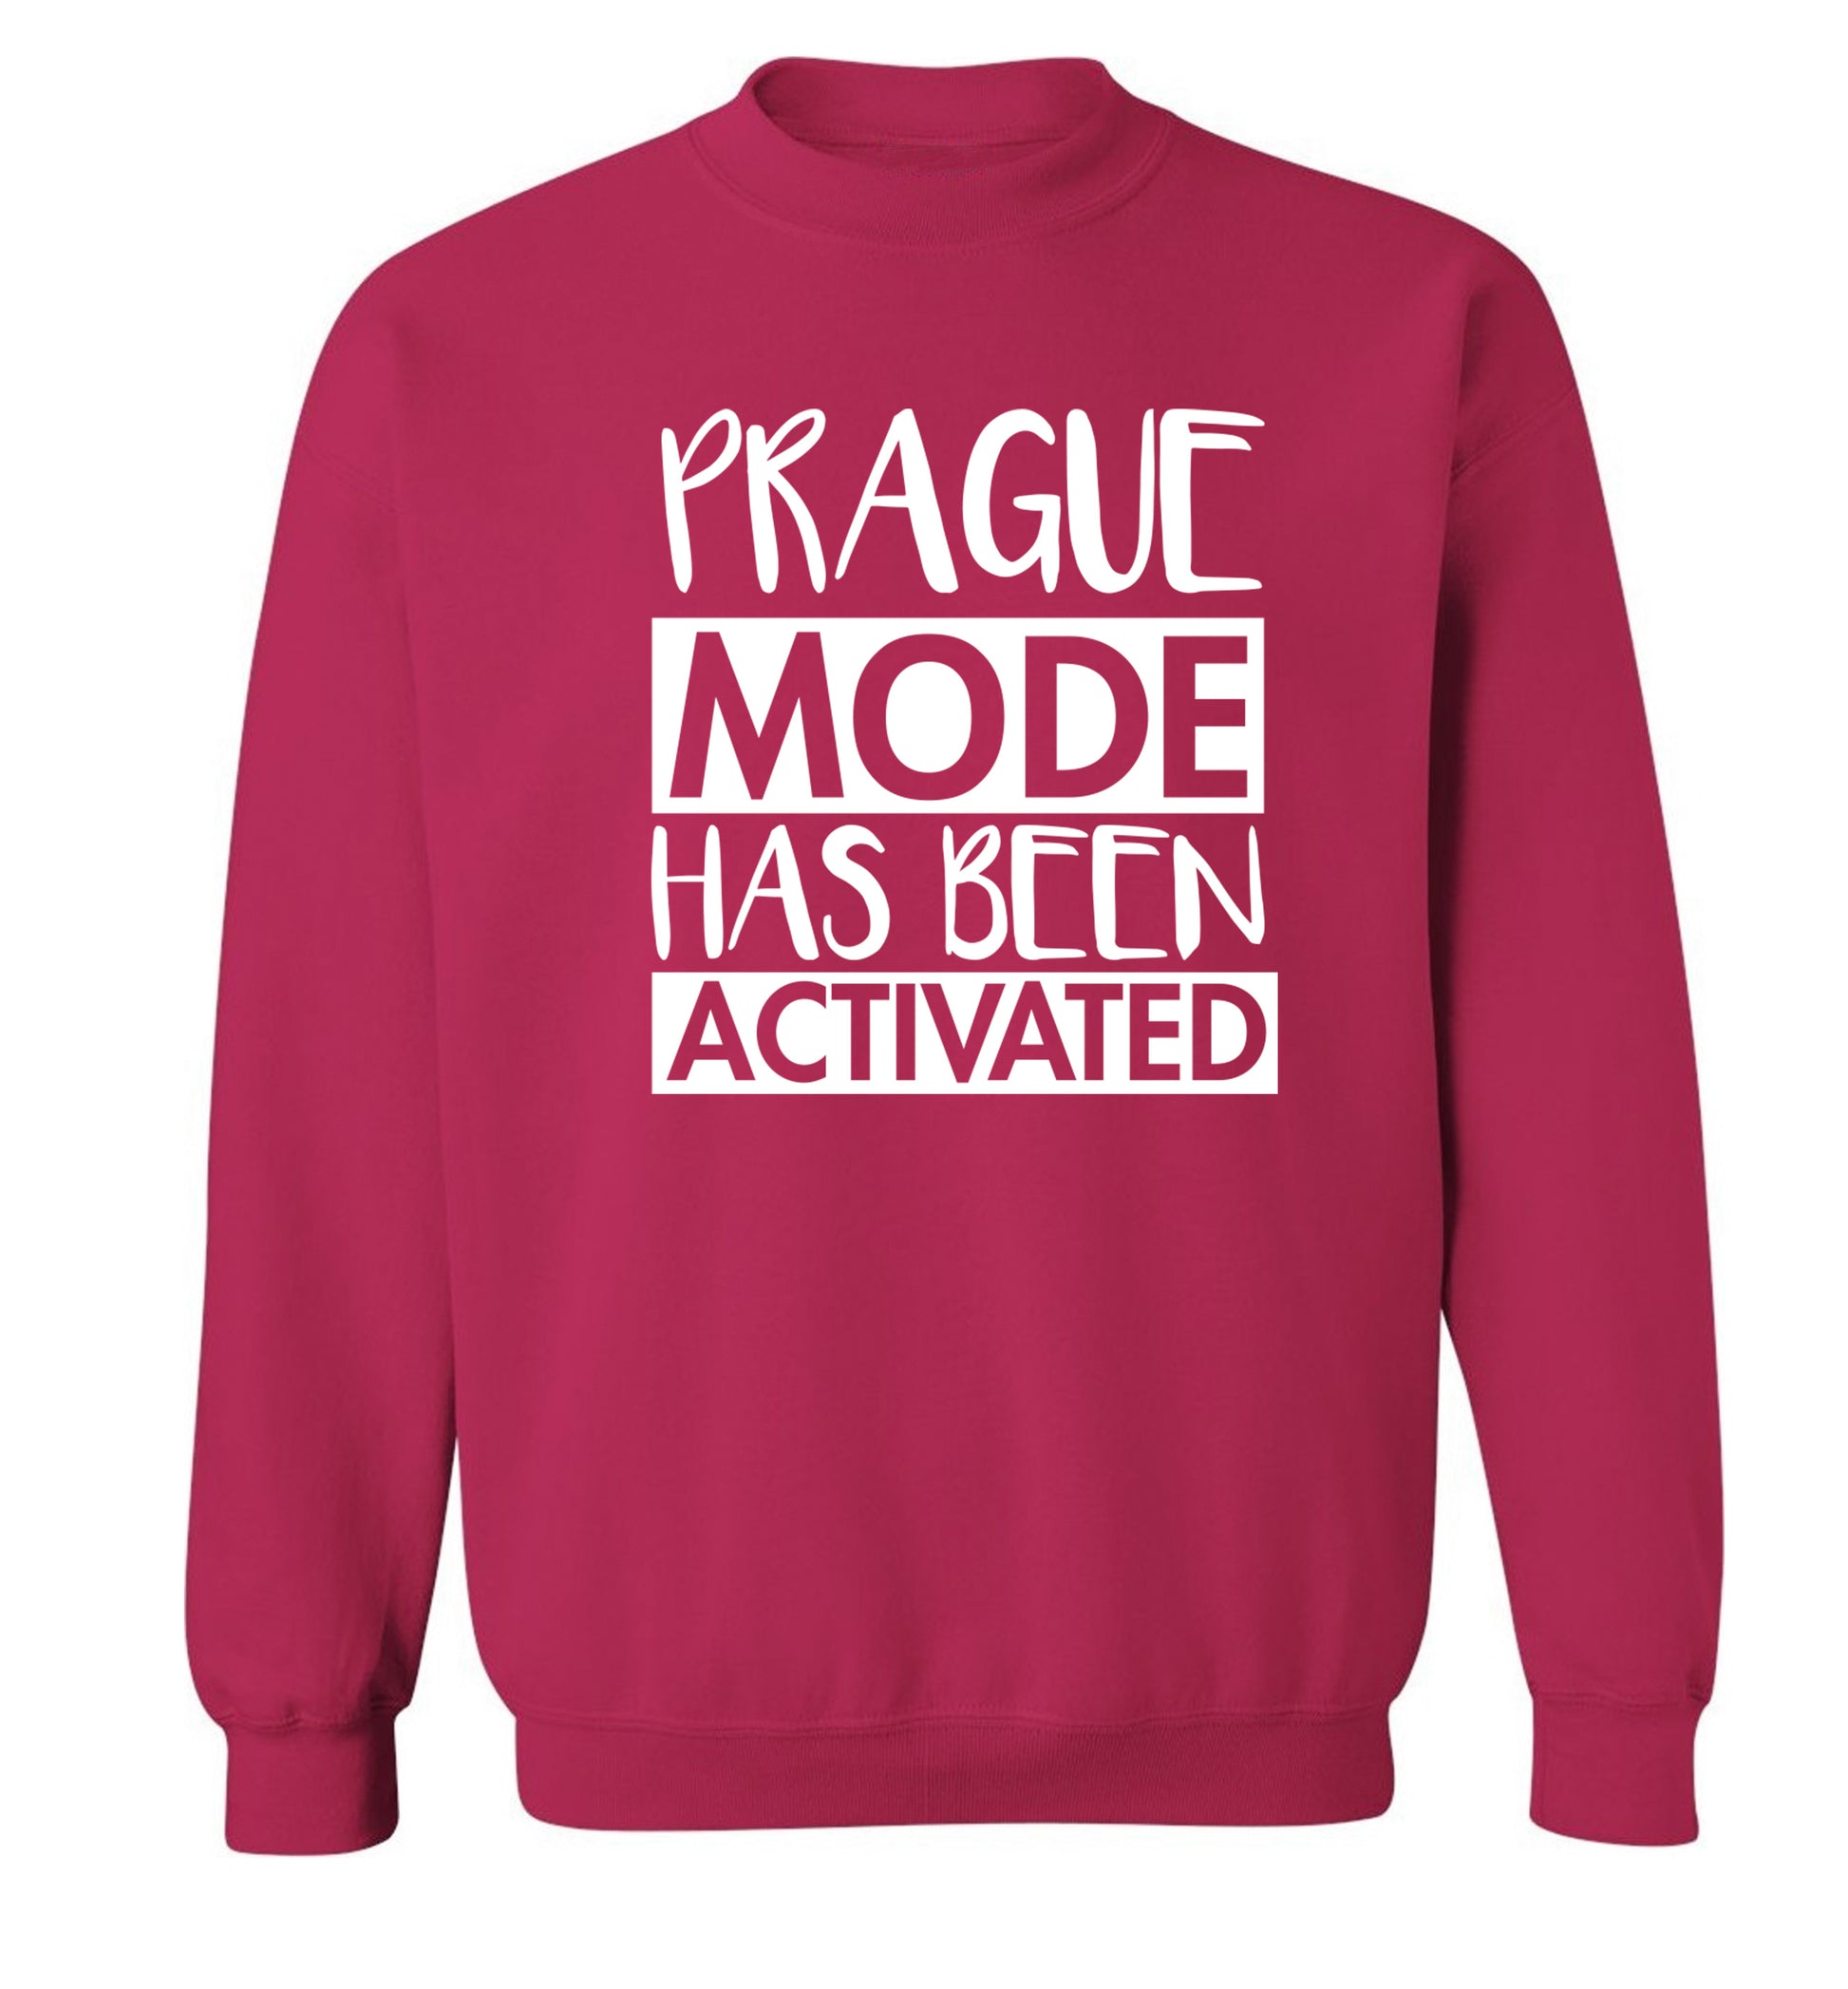 Prague mode has been activated Adult's unisex pink Sweater 2XL